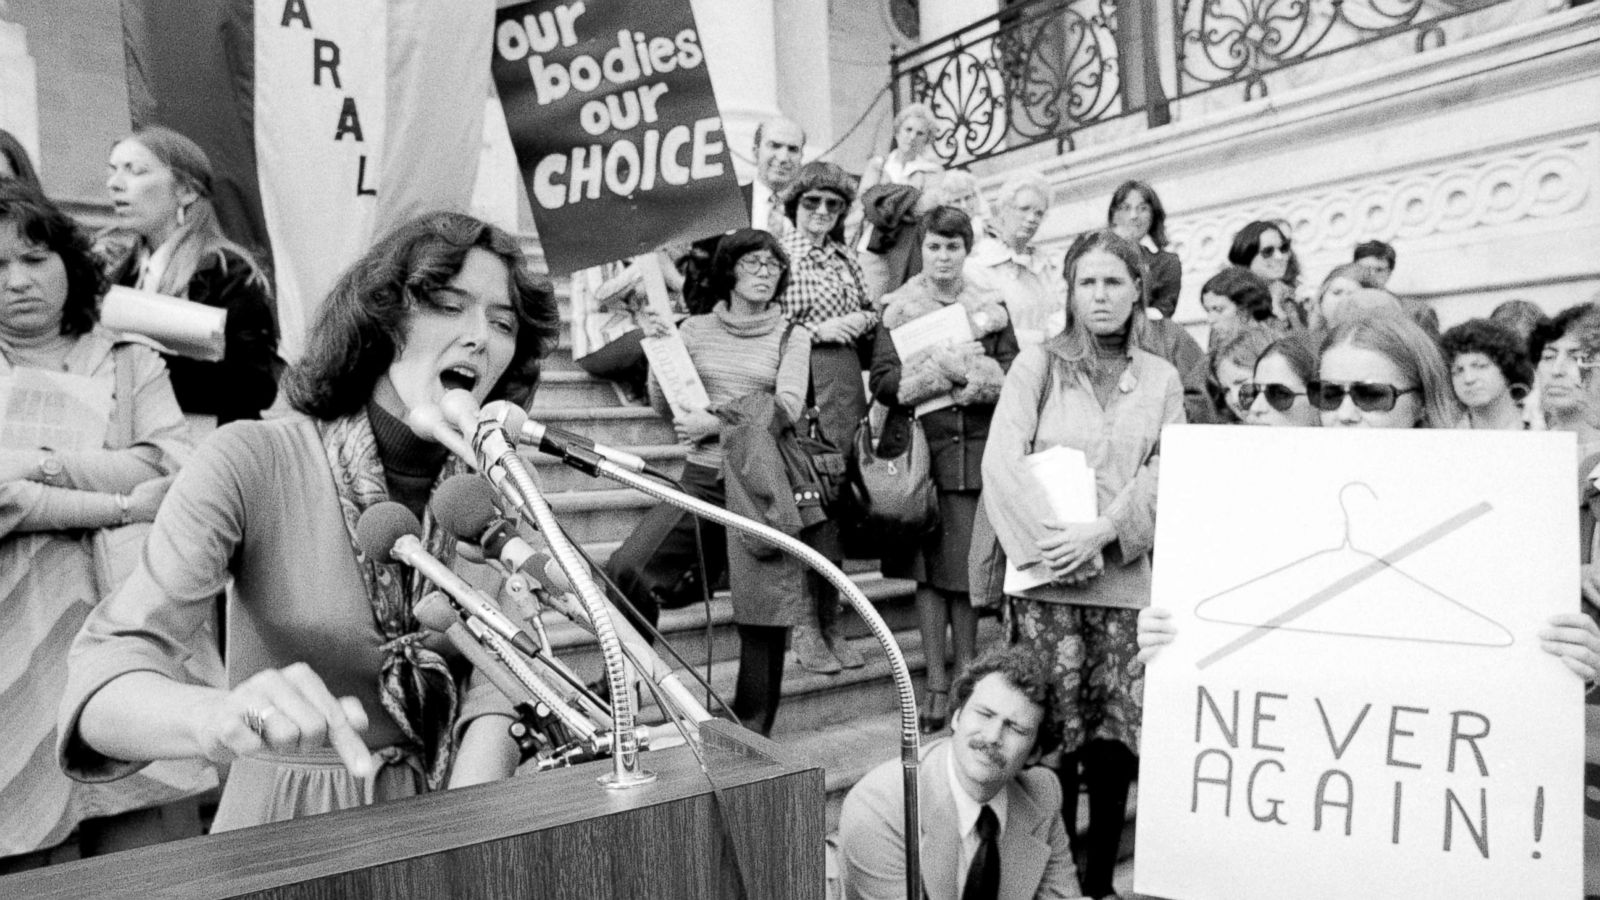 Black and white image of a courtroom in the 1970s shows a woman speaking into a microphone at the stand and people holding signs surrounding her adocating against abortion law